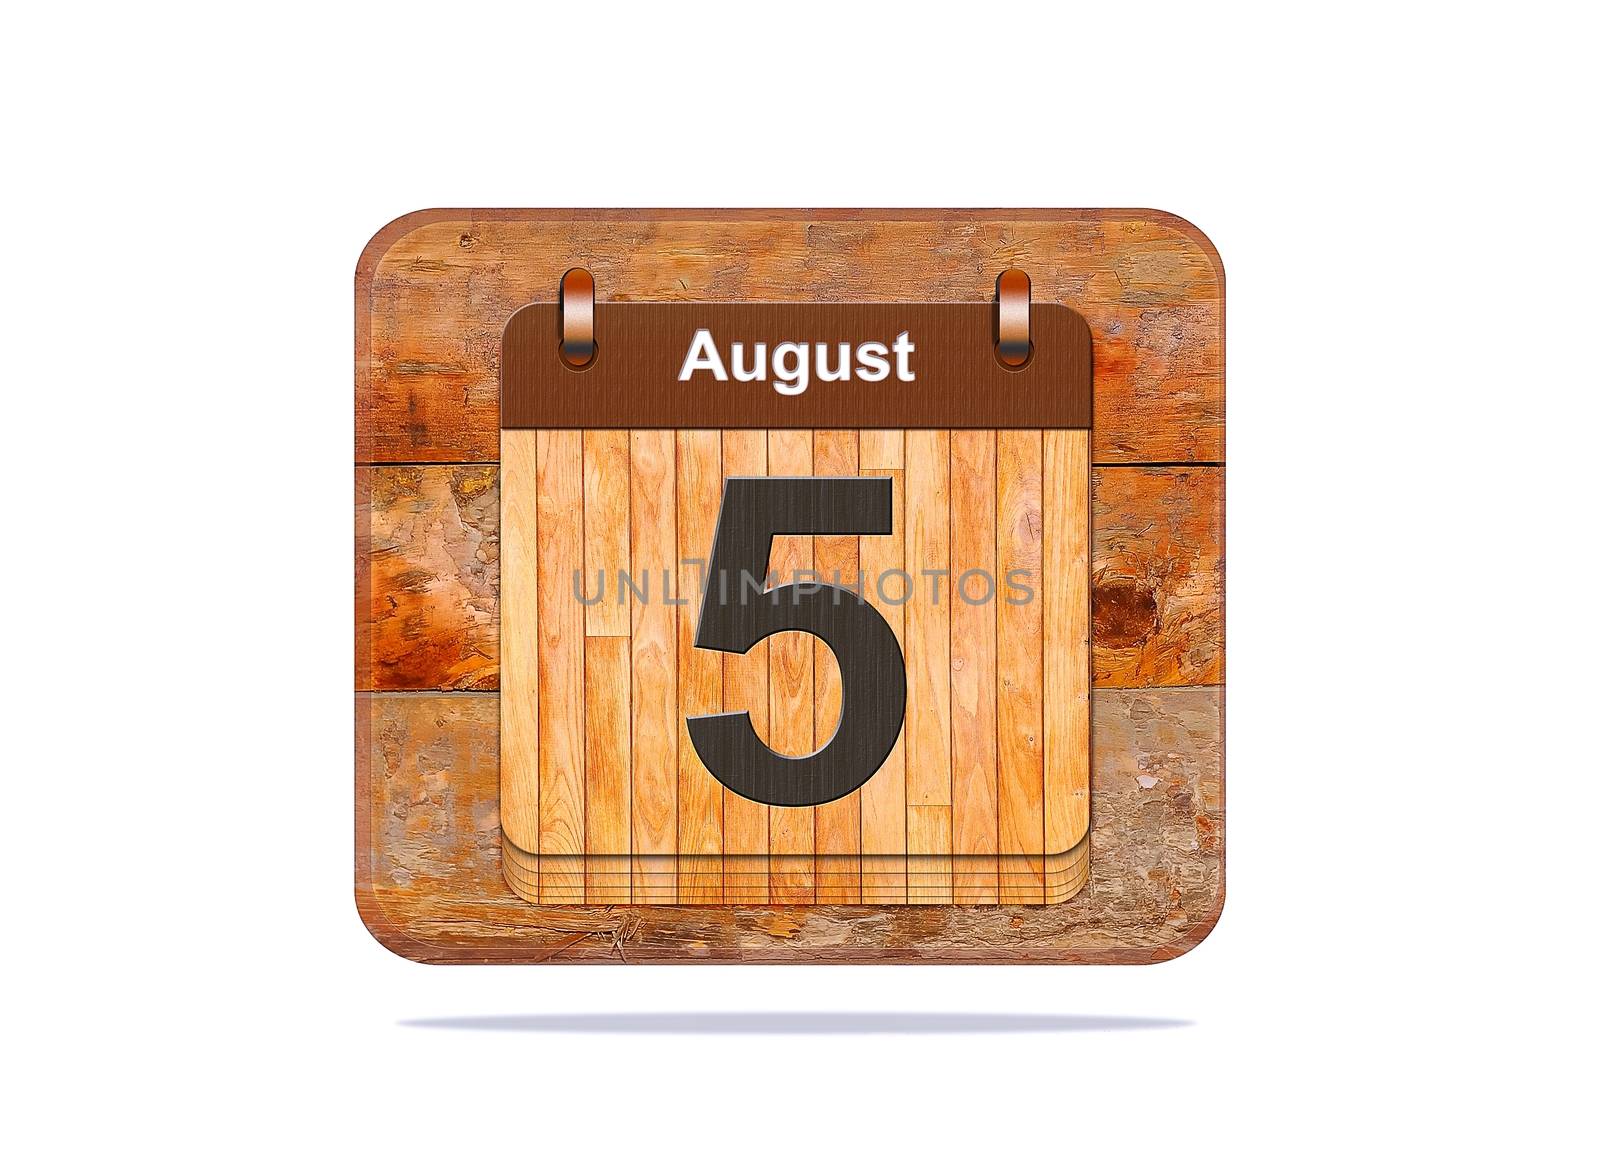 Calendar with the date of August 5.